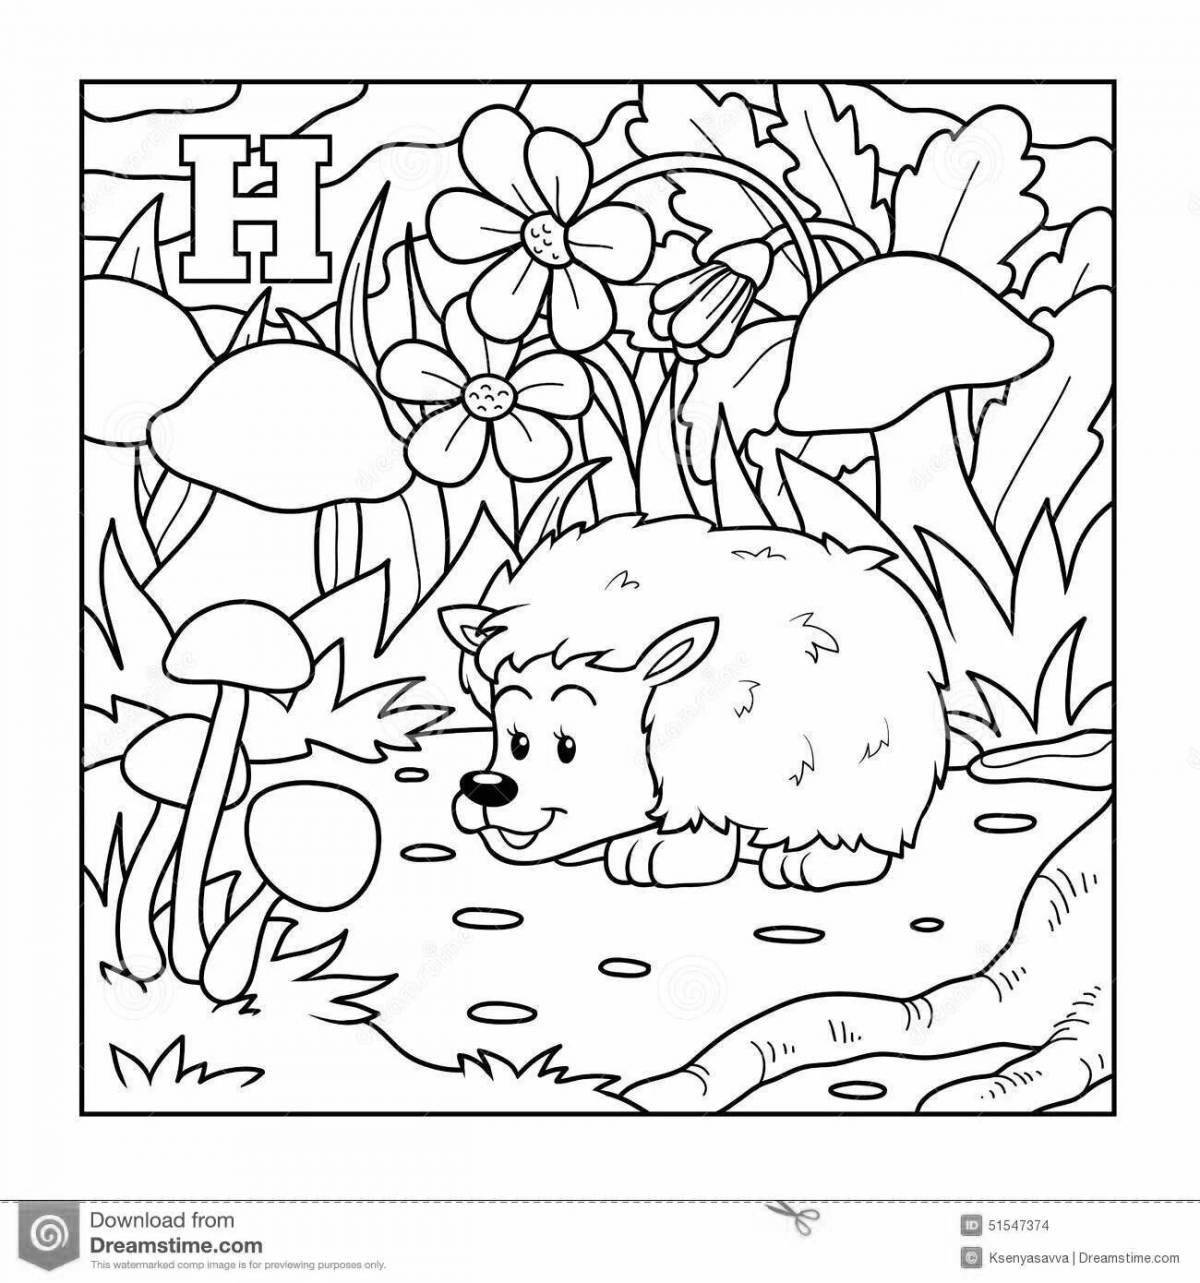 Colouring awesome hedgehog by numbers